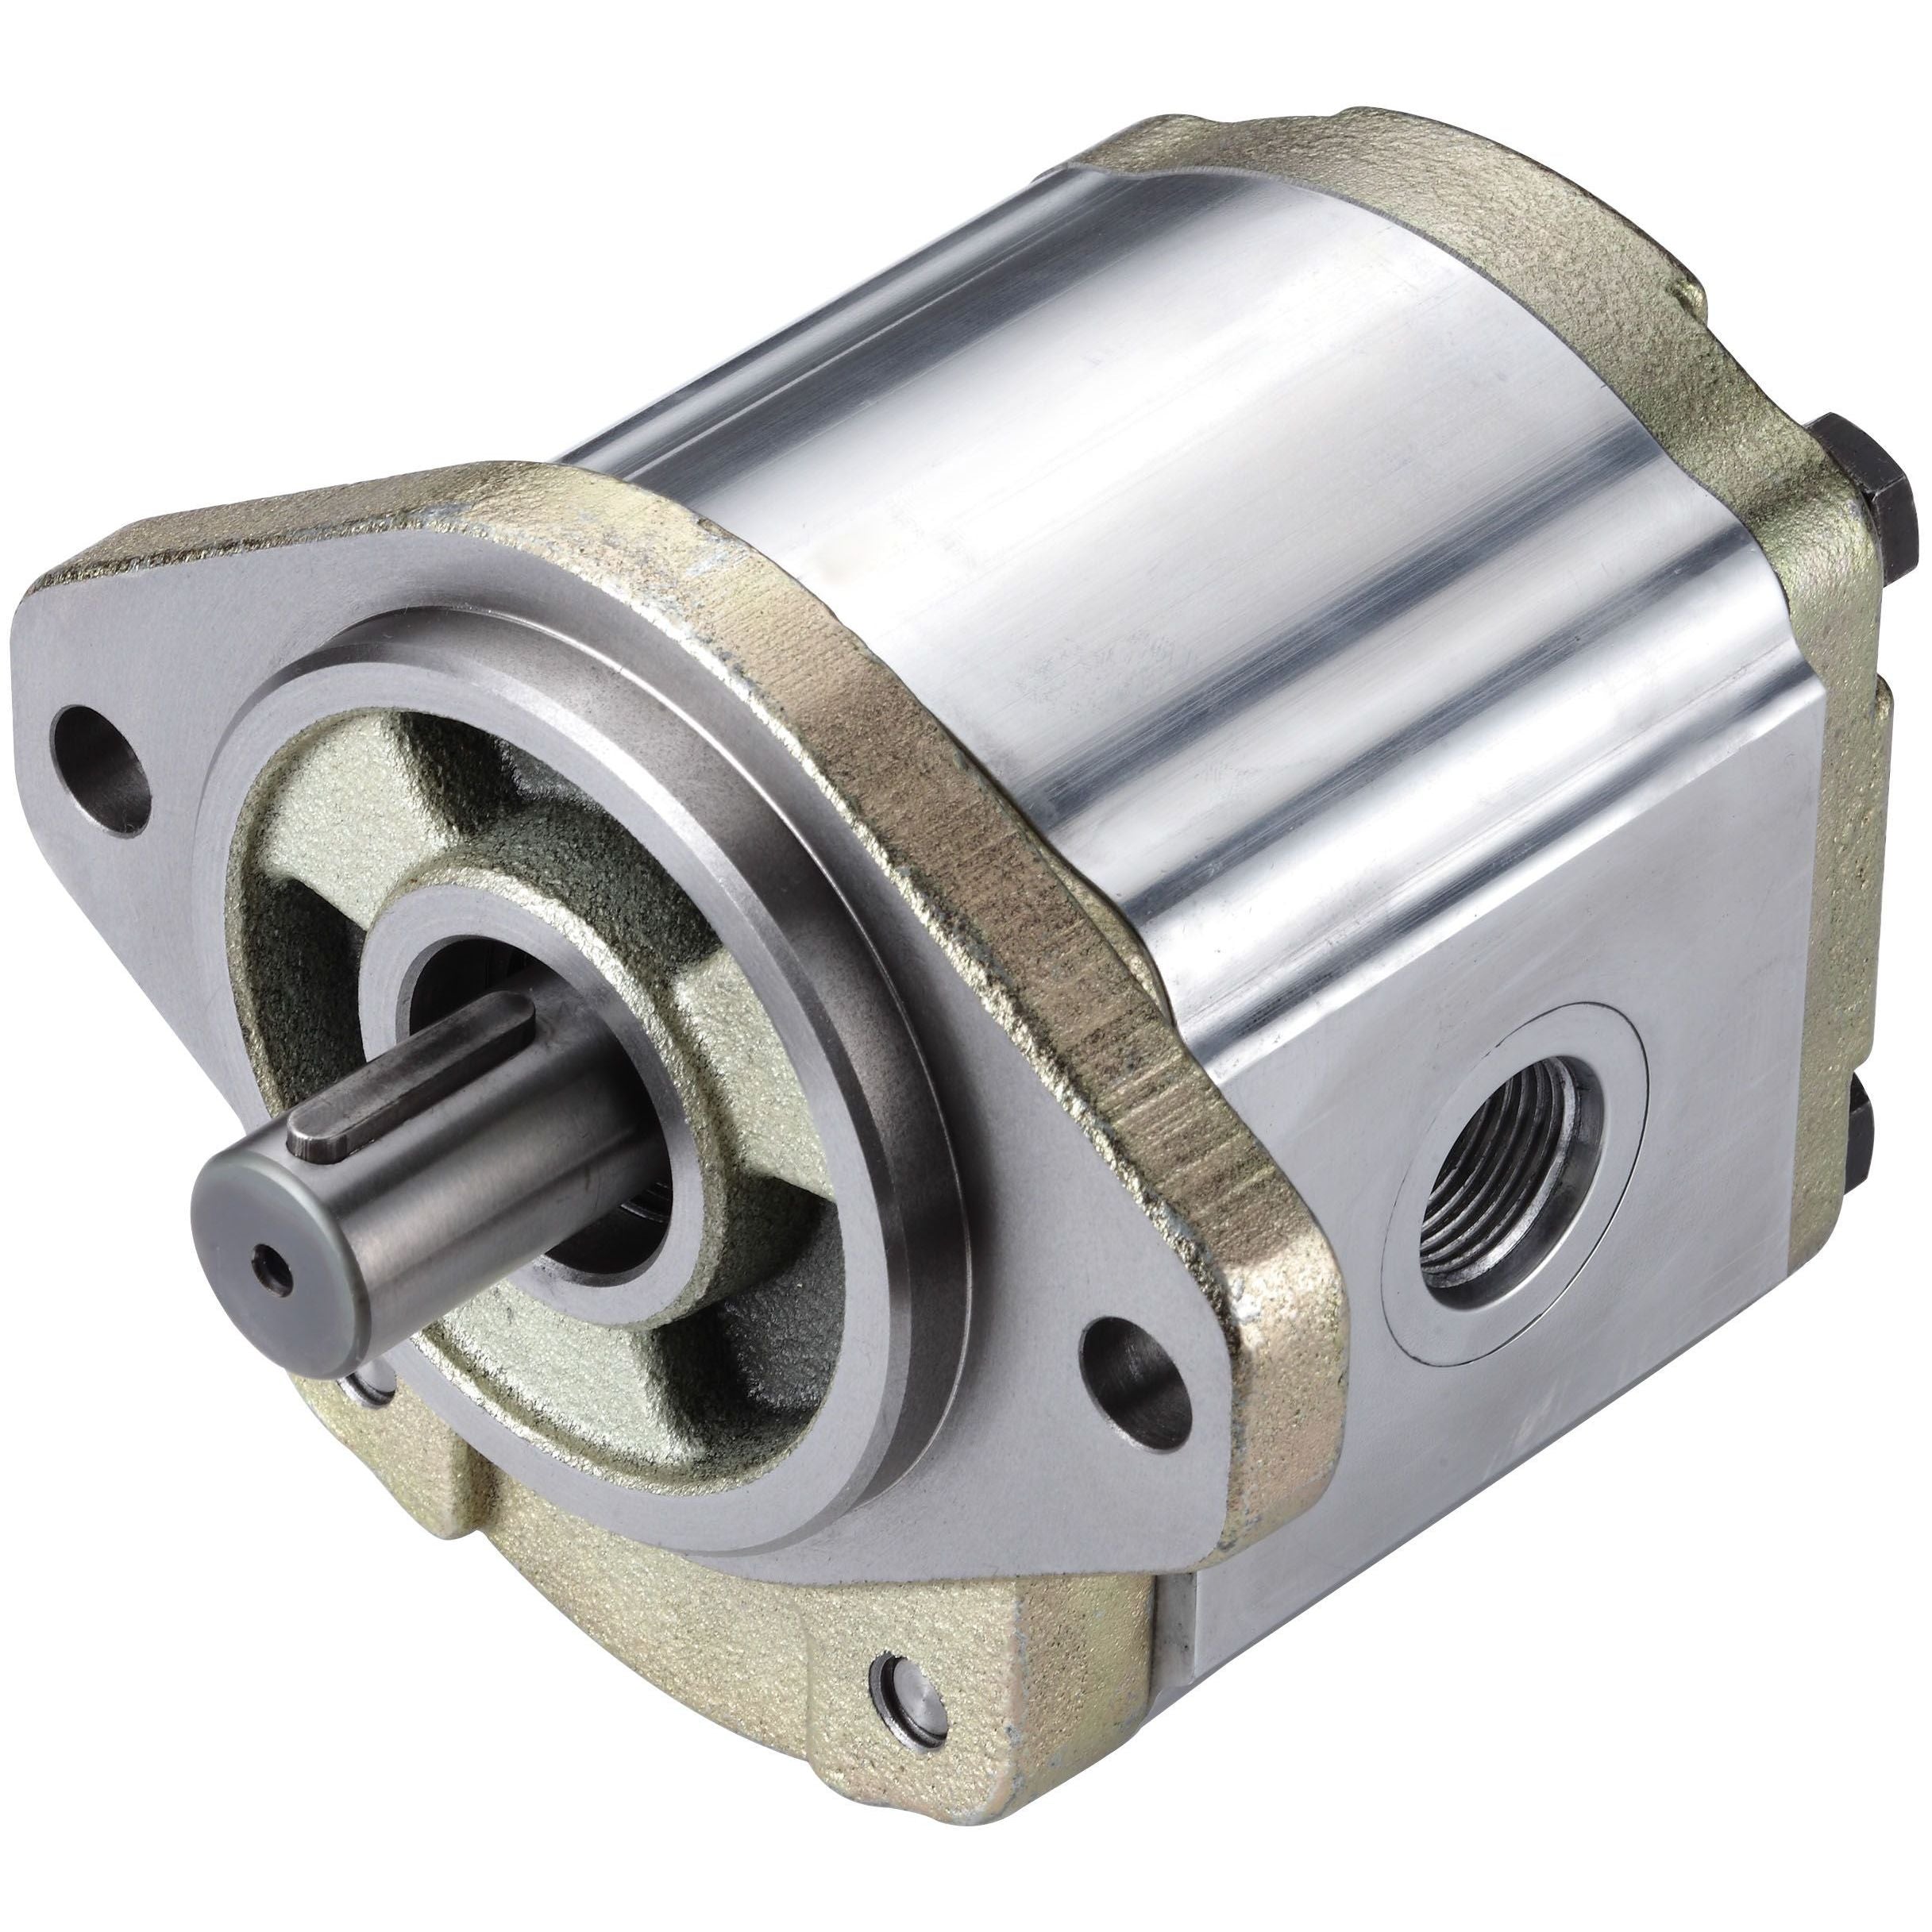 3GA5ZU128L : Honor Gear Pump, CCW Rotation, 28cc (1.71in3), 13.31 GPM, 3500psi, 3000 RPM, #16 SAE (1") In, #12 SAE (3/4") Out, Splined Shaft 11-Tooth, 16/32 Pitch, SAE A 2-Bolt Mount